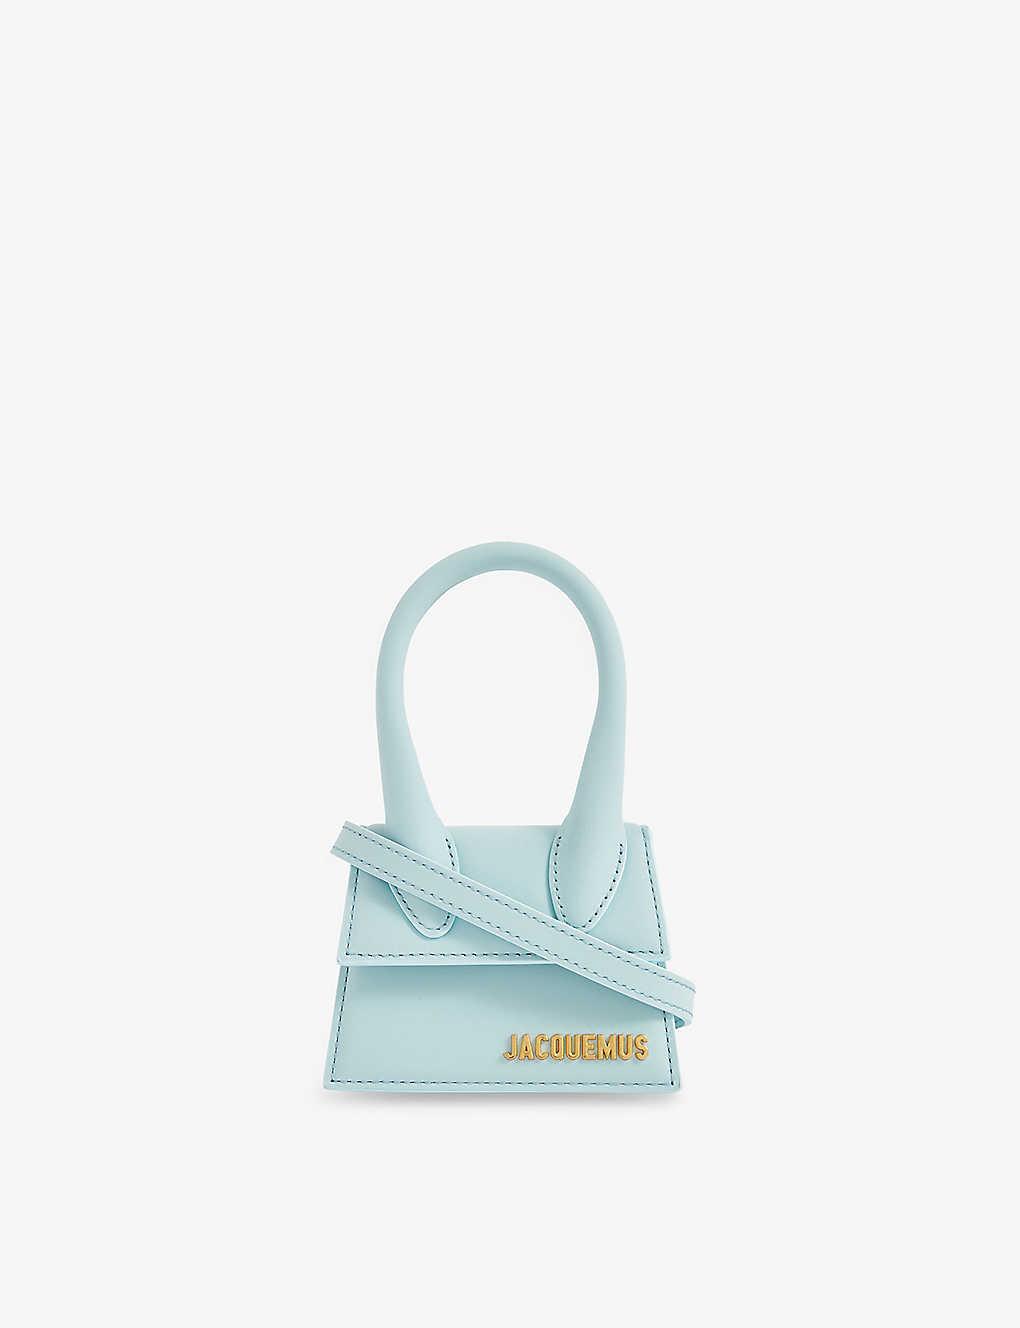 Jacquemus Le Chiquito Mini Leather Cross-body Bag in Blue | Lyst